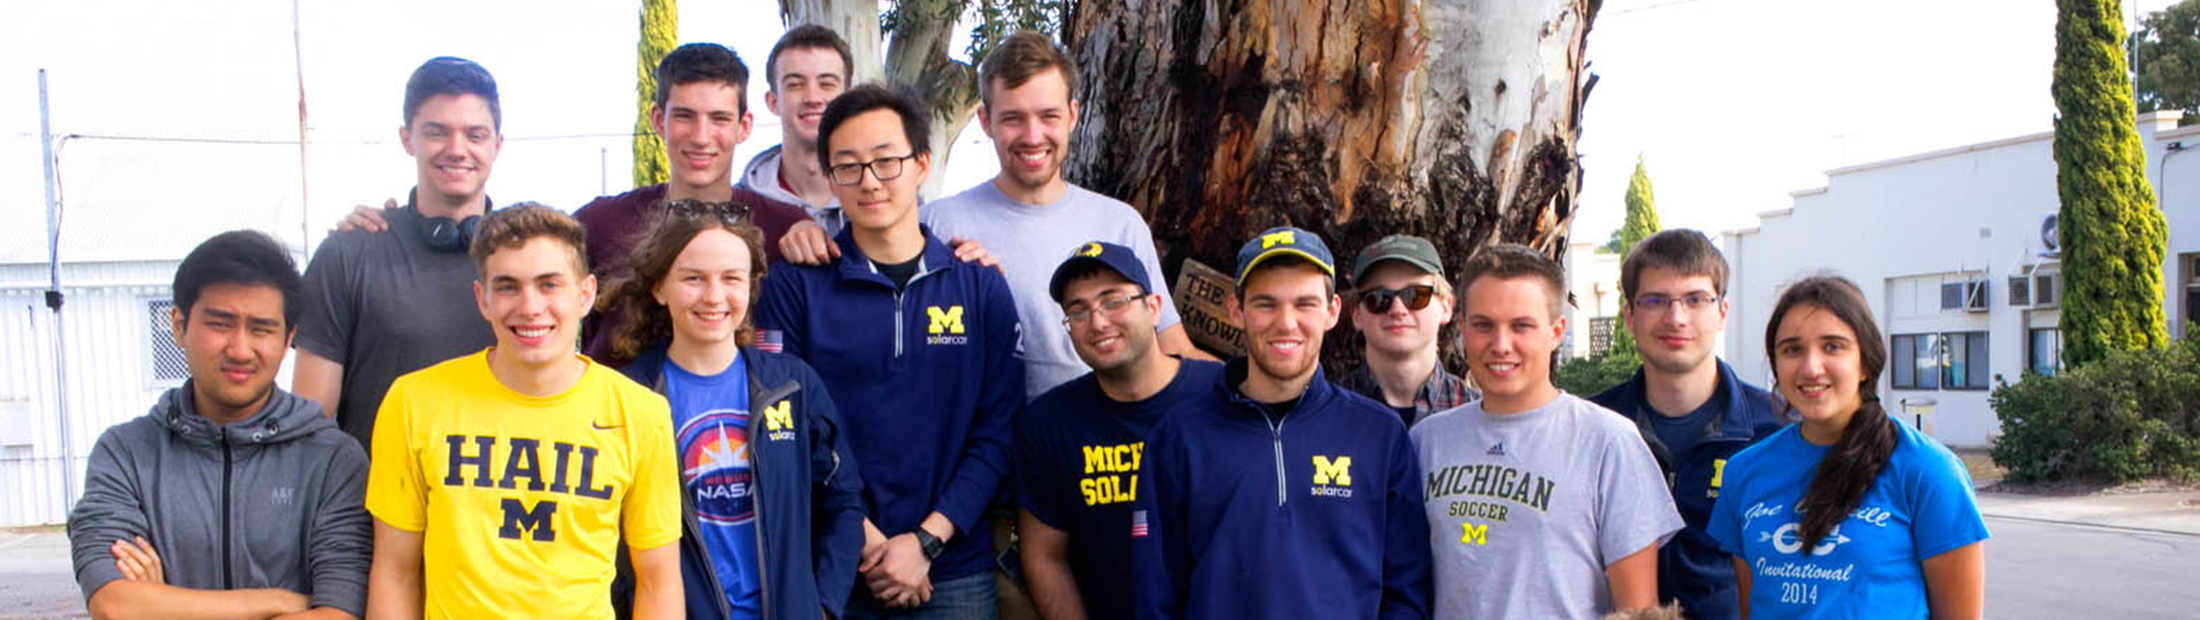 A group picture of students in Michigan apparel.